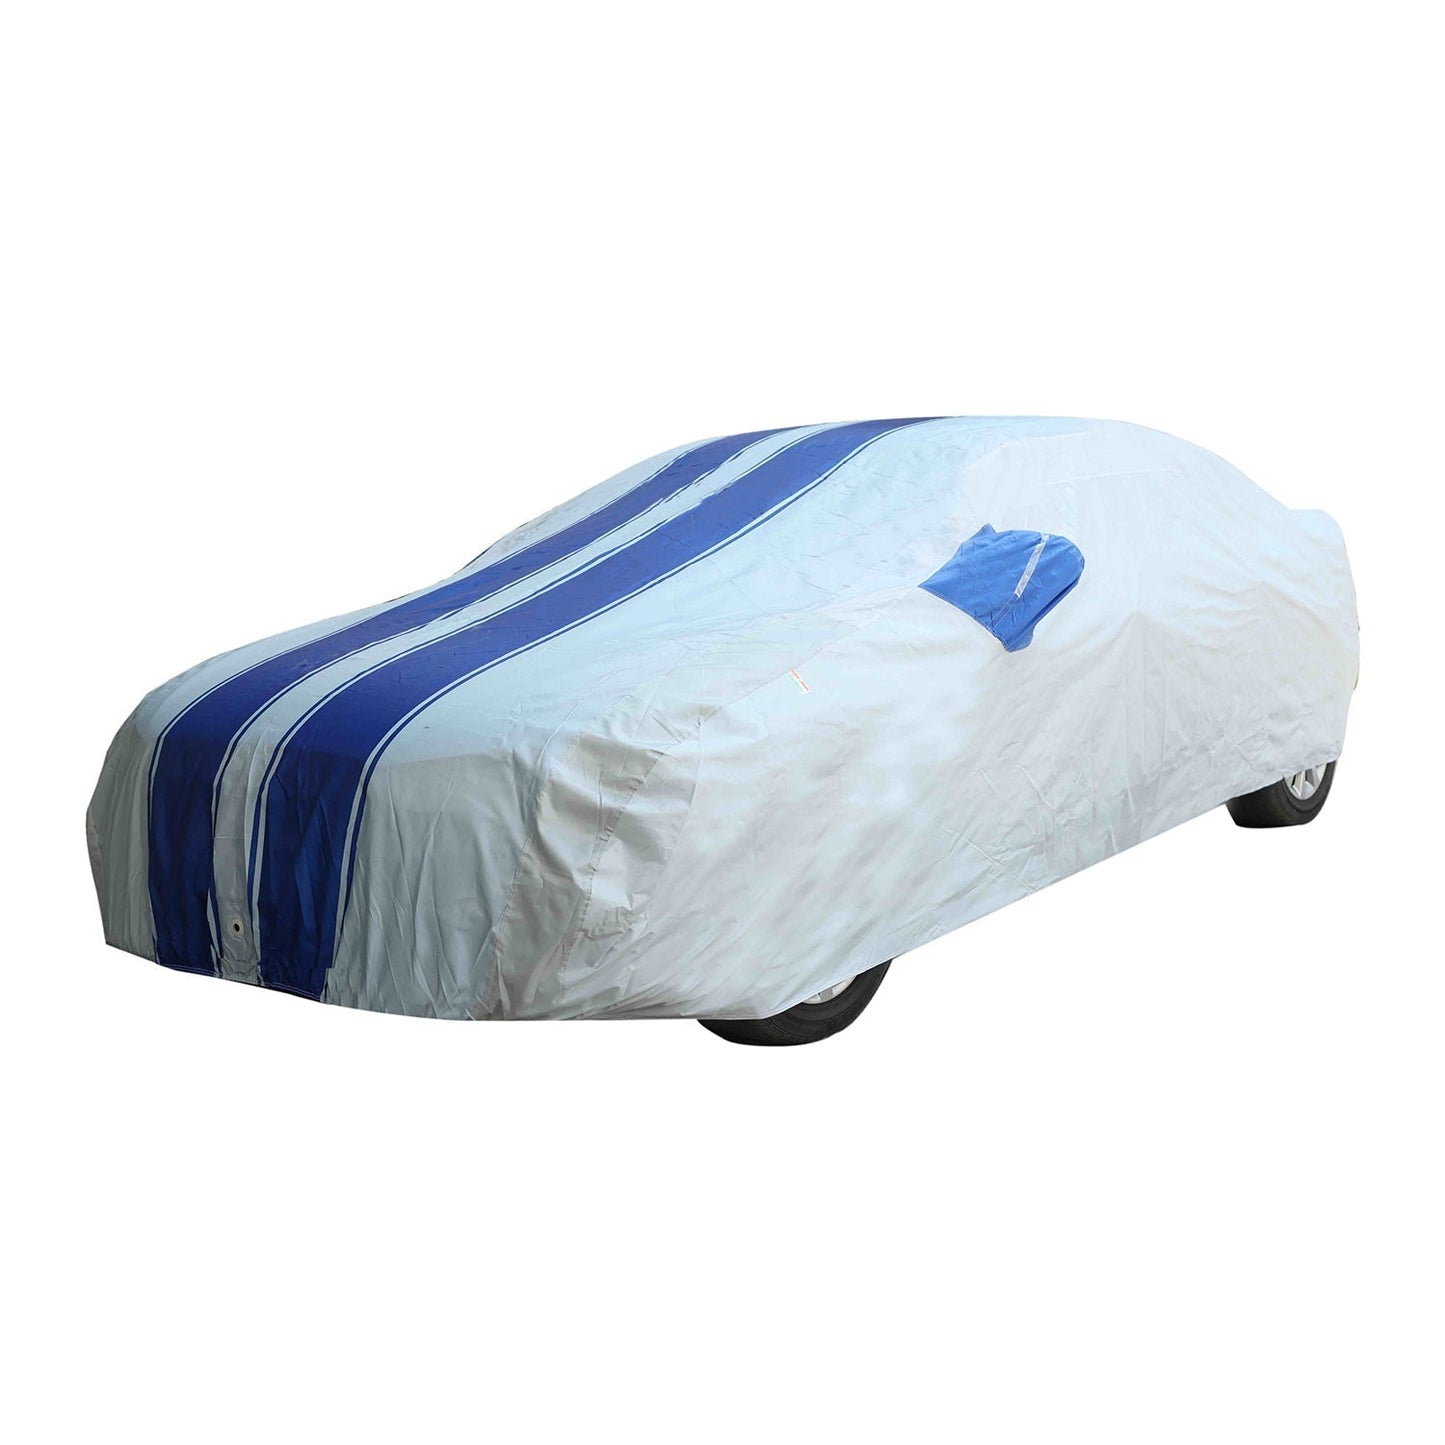 Oshotto 100% Blue dustproof and Water Resistant Car Body Cover with Mirror Pockets For BMW 3 Series 2020-2023